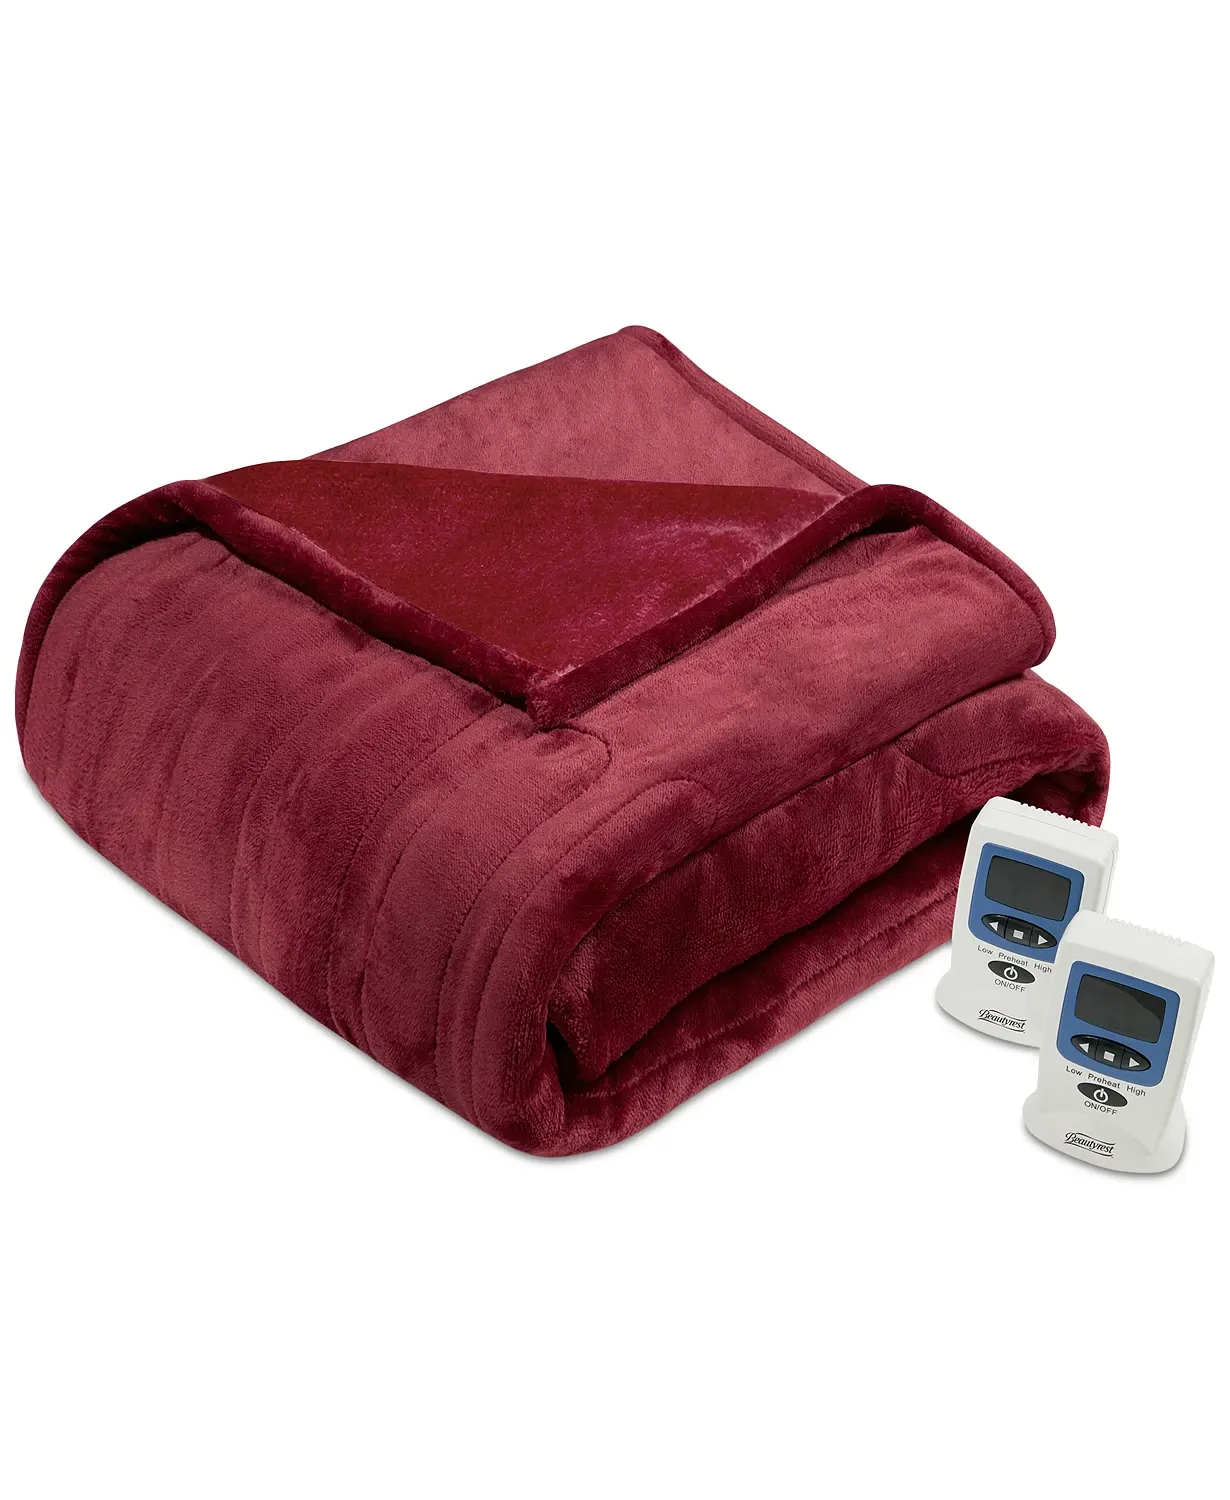 Beautyrest Plush Lightweight Ultra Soft Cozy Washable Electric